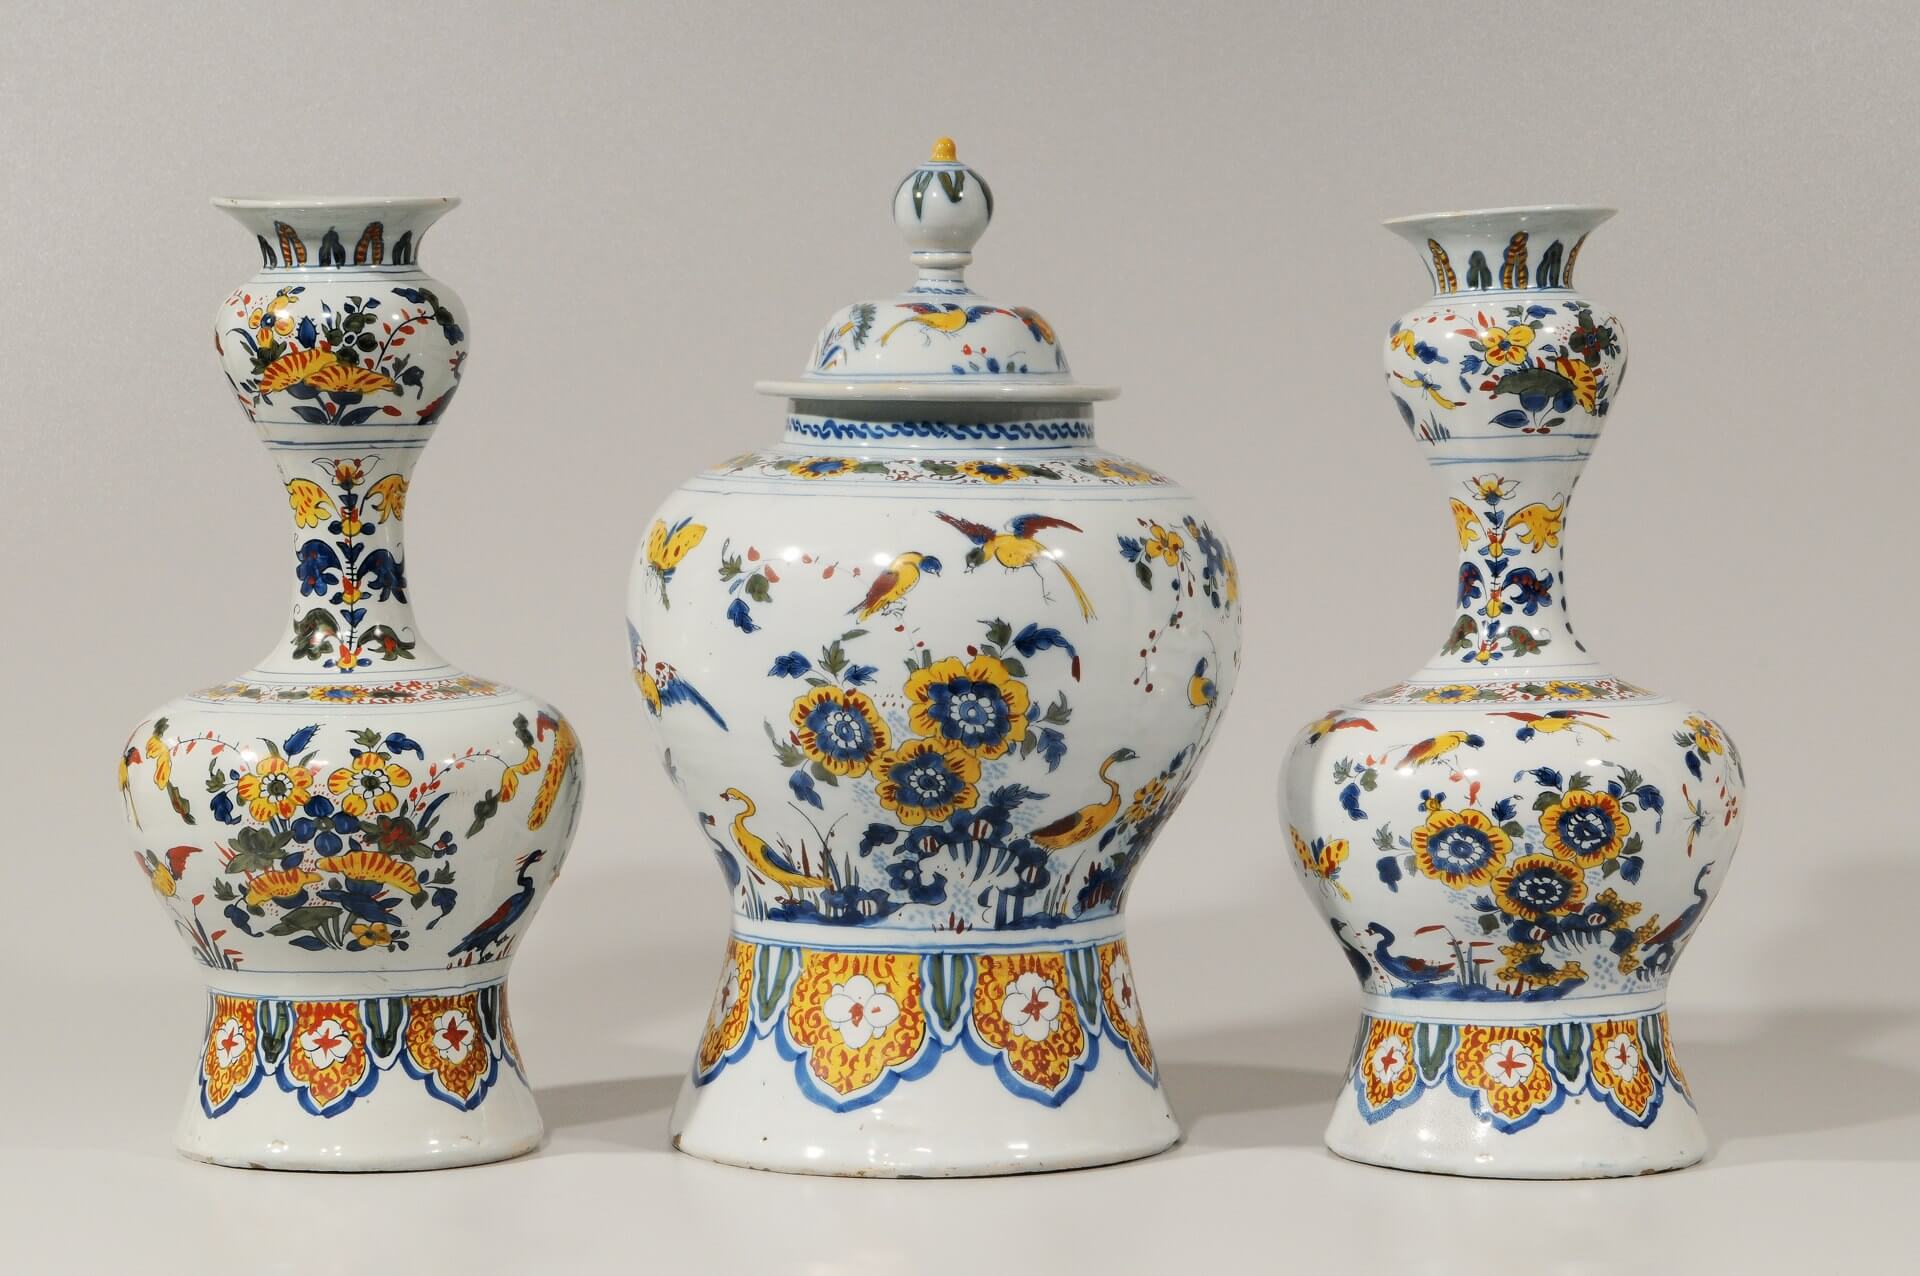 Garniture of antique ceramic pottery vases with one cover